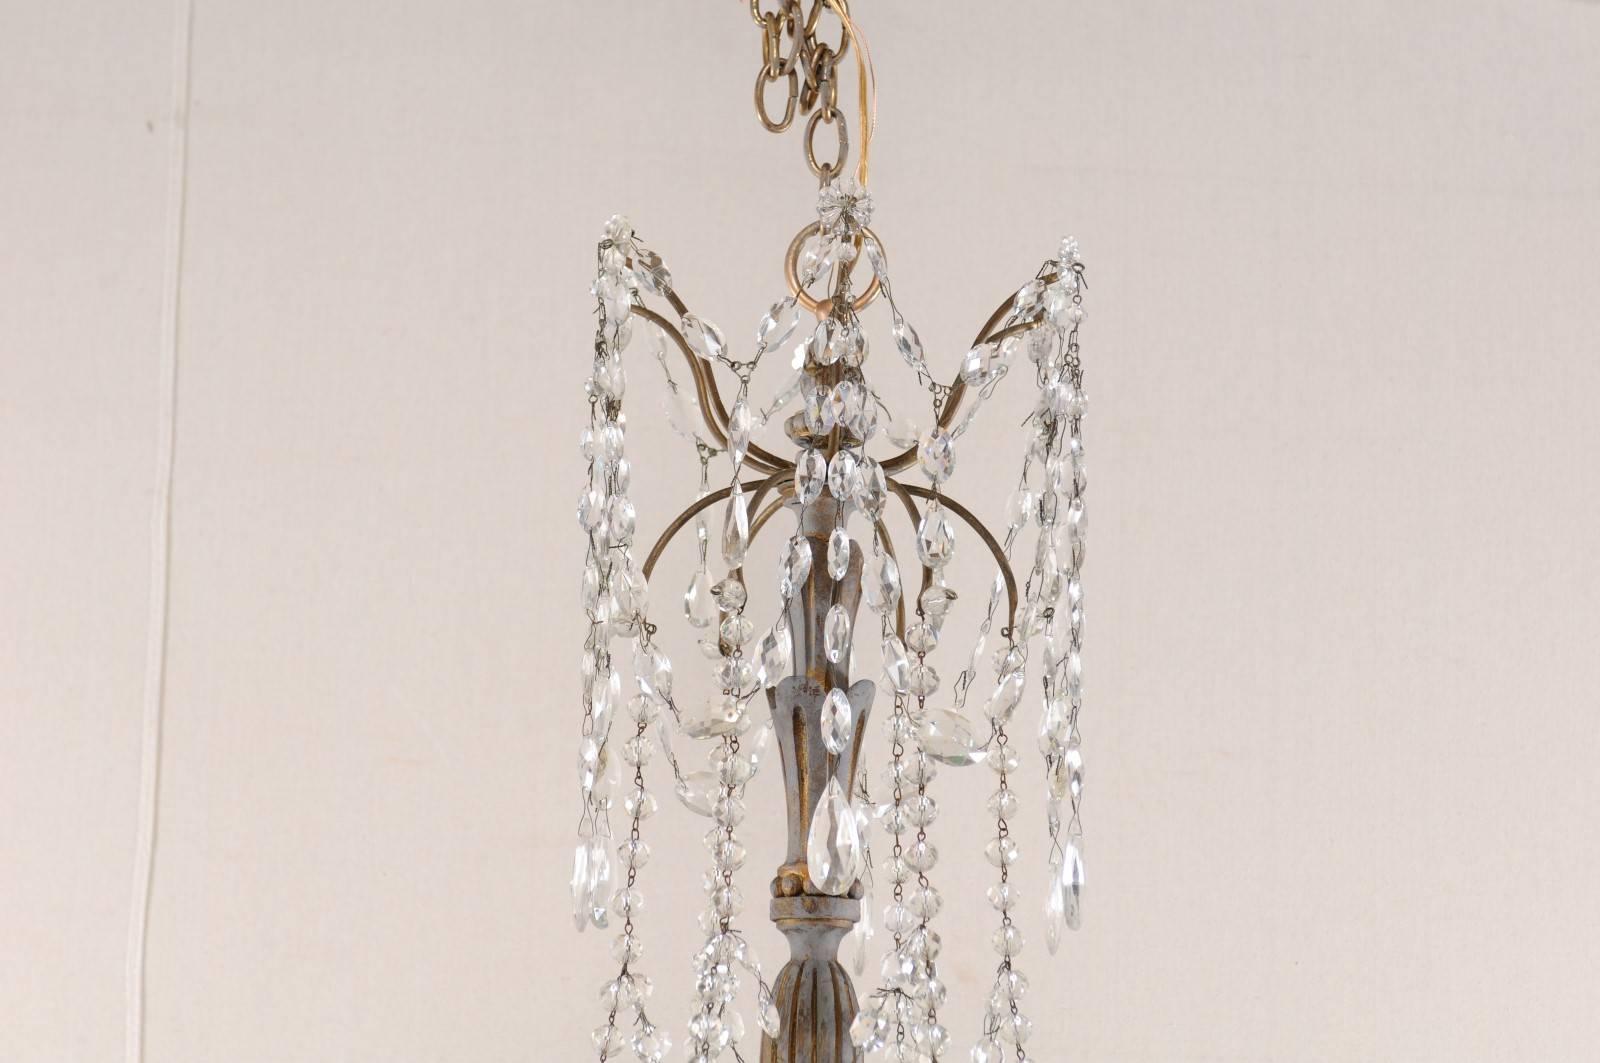 20th Century Italian Antique Crystal Six-Light Chandelier, Painted with Gilt Accents